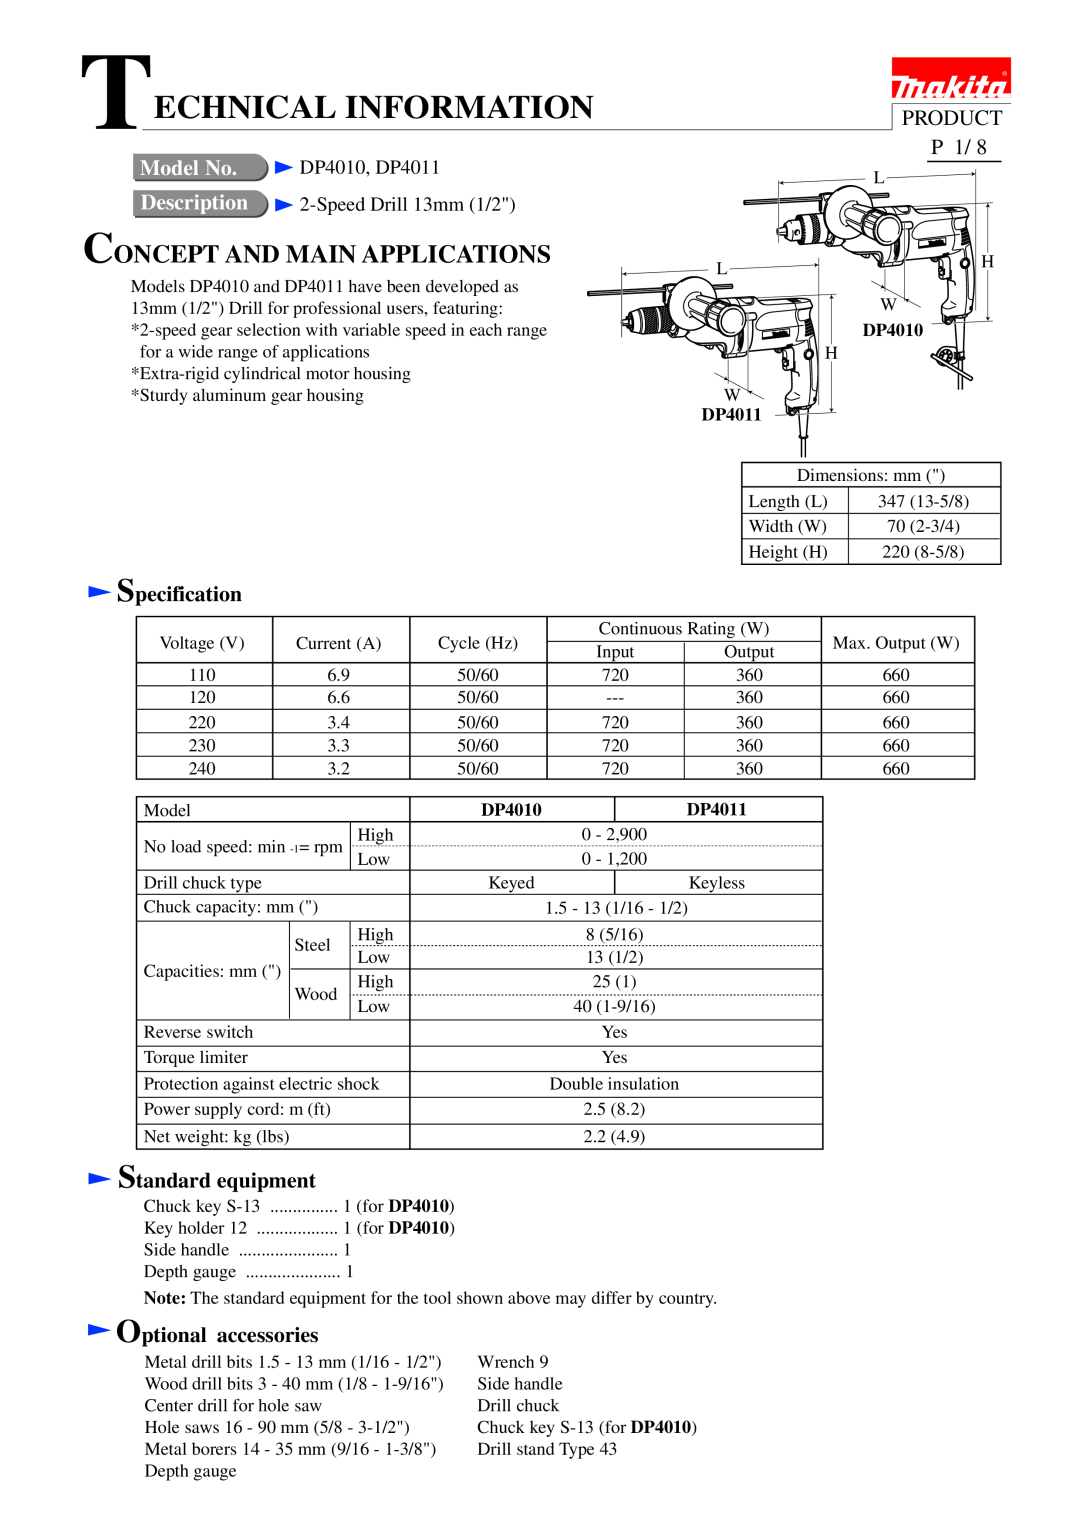 Makita DP4010 specifications Product, Specification, Standard equipment, Optional accessories, DP4011, Model No 